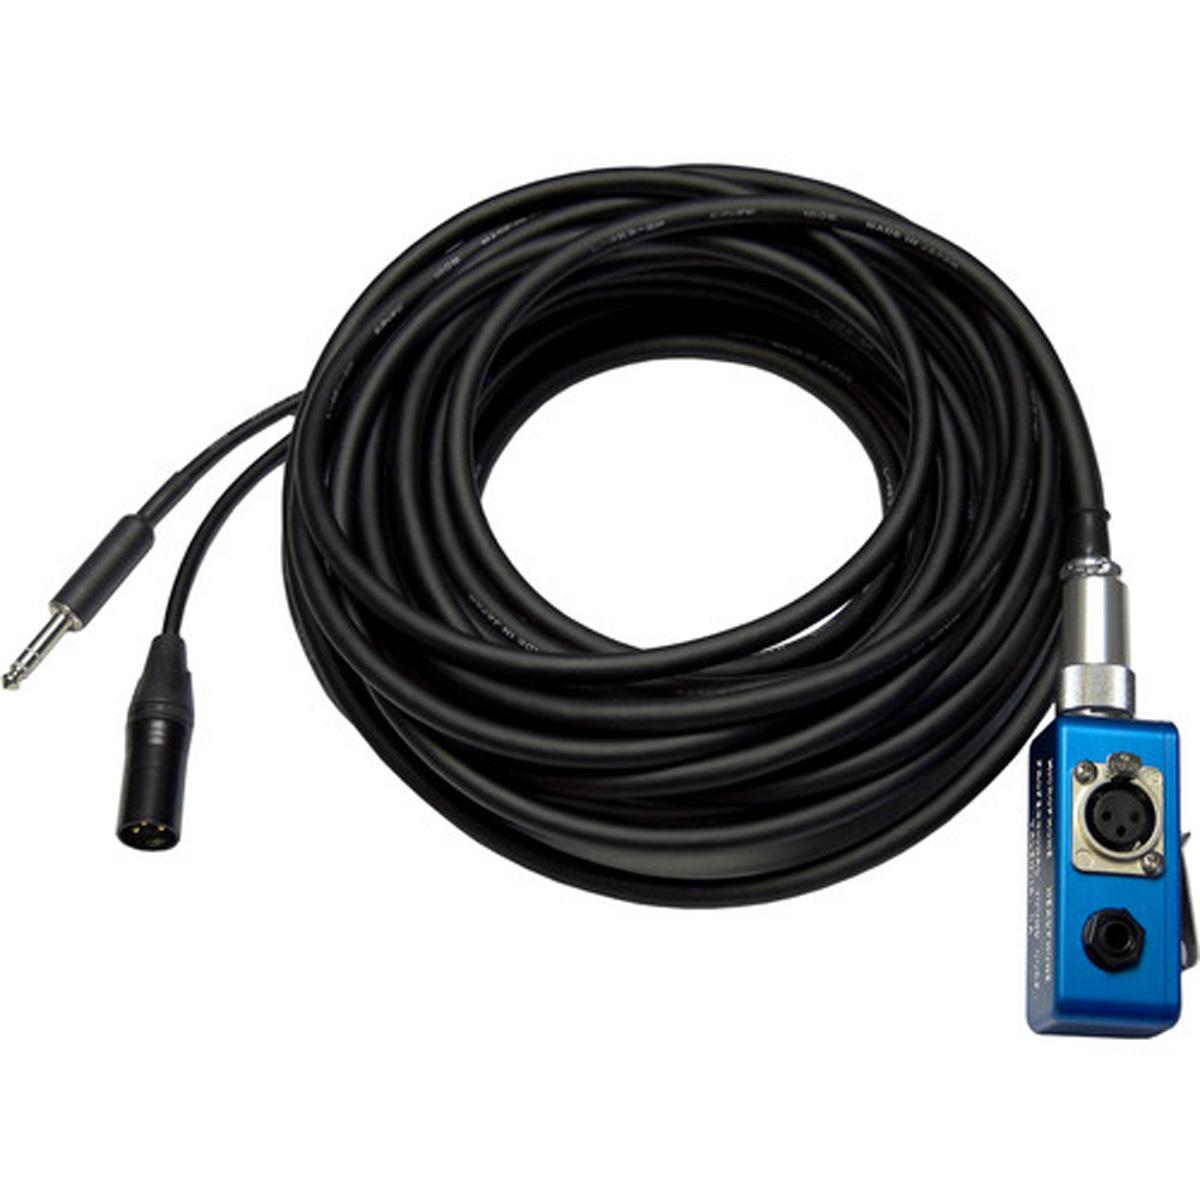 

PSC 25' Duplex Boom Cable with Breakout Box